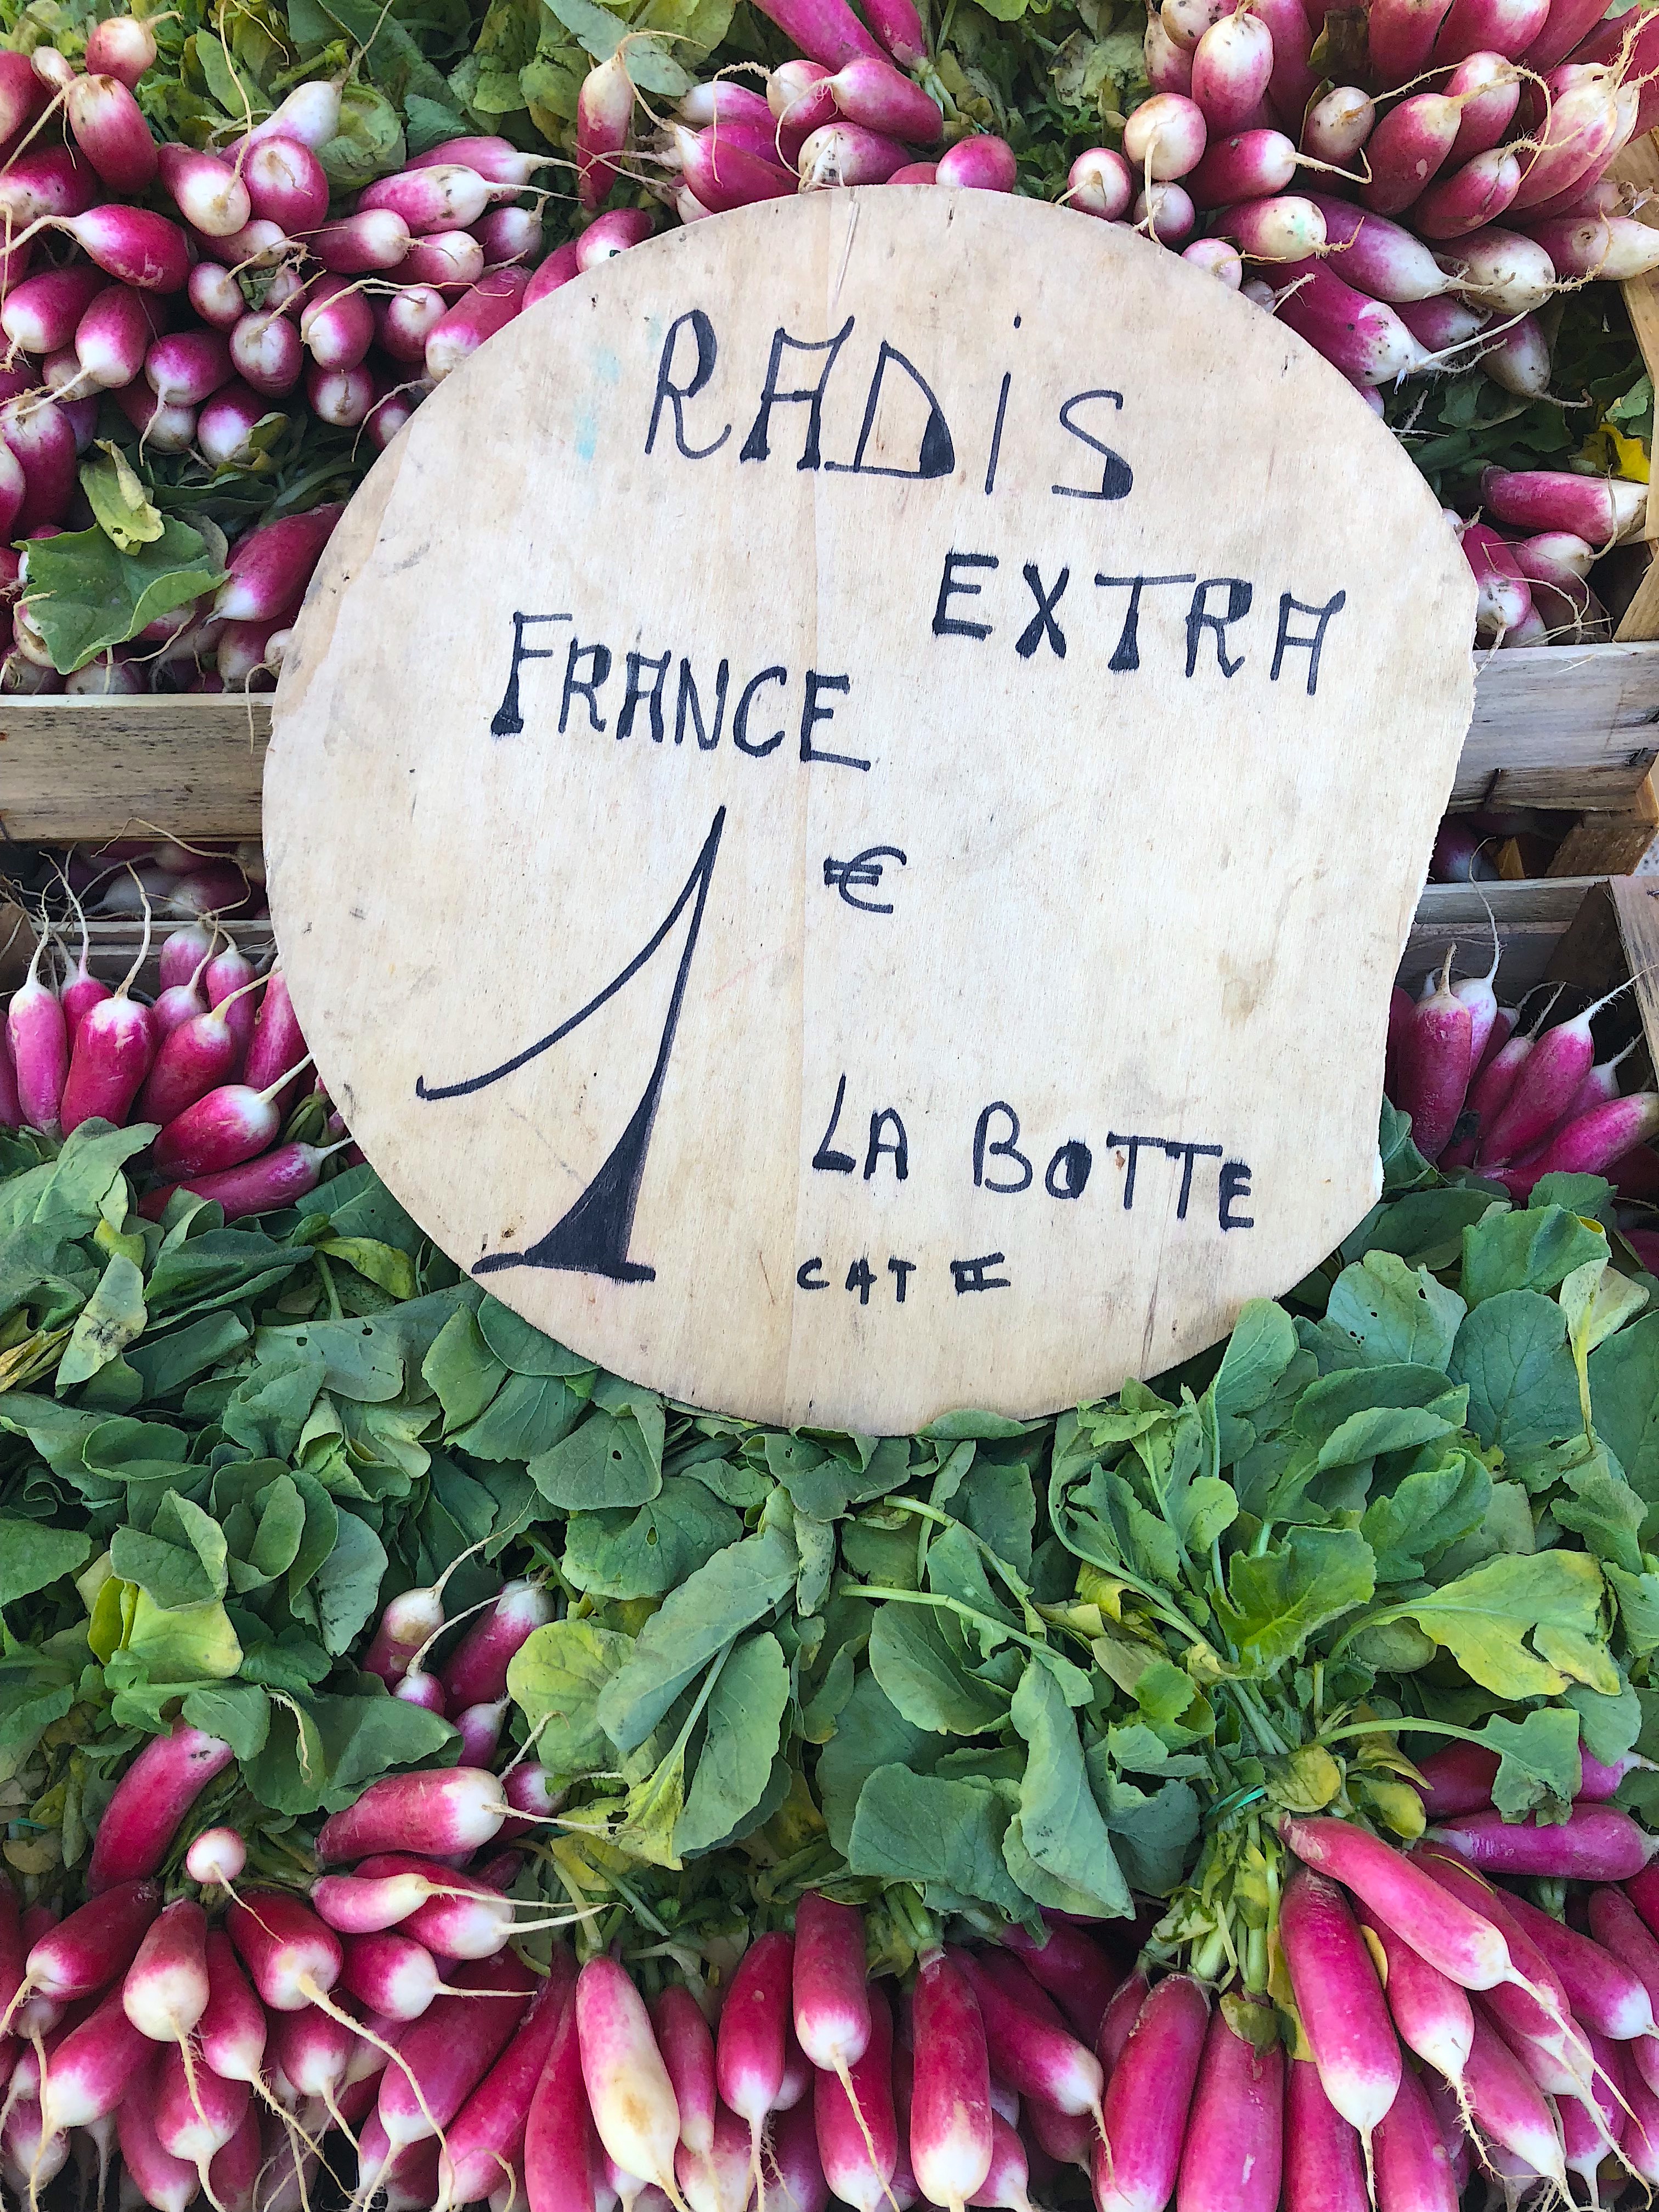 All You Need to Know About the Markets in Provence